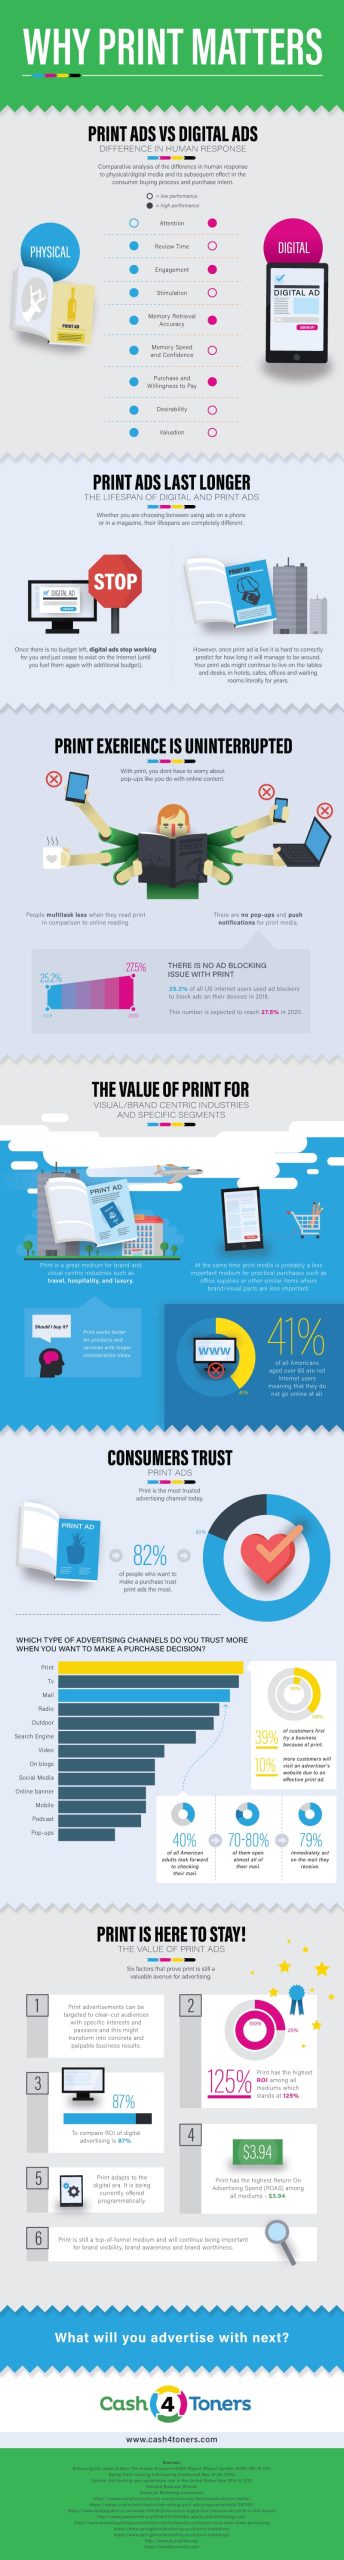 Why Print Matters INFOGRAPHIC